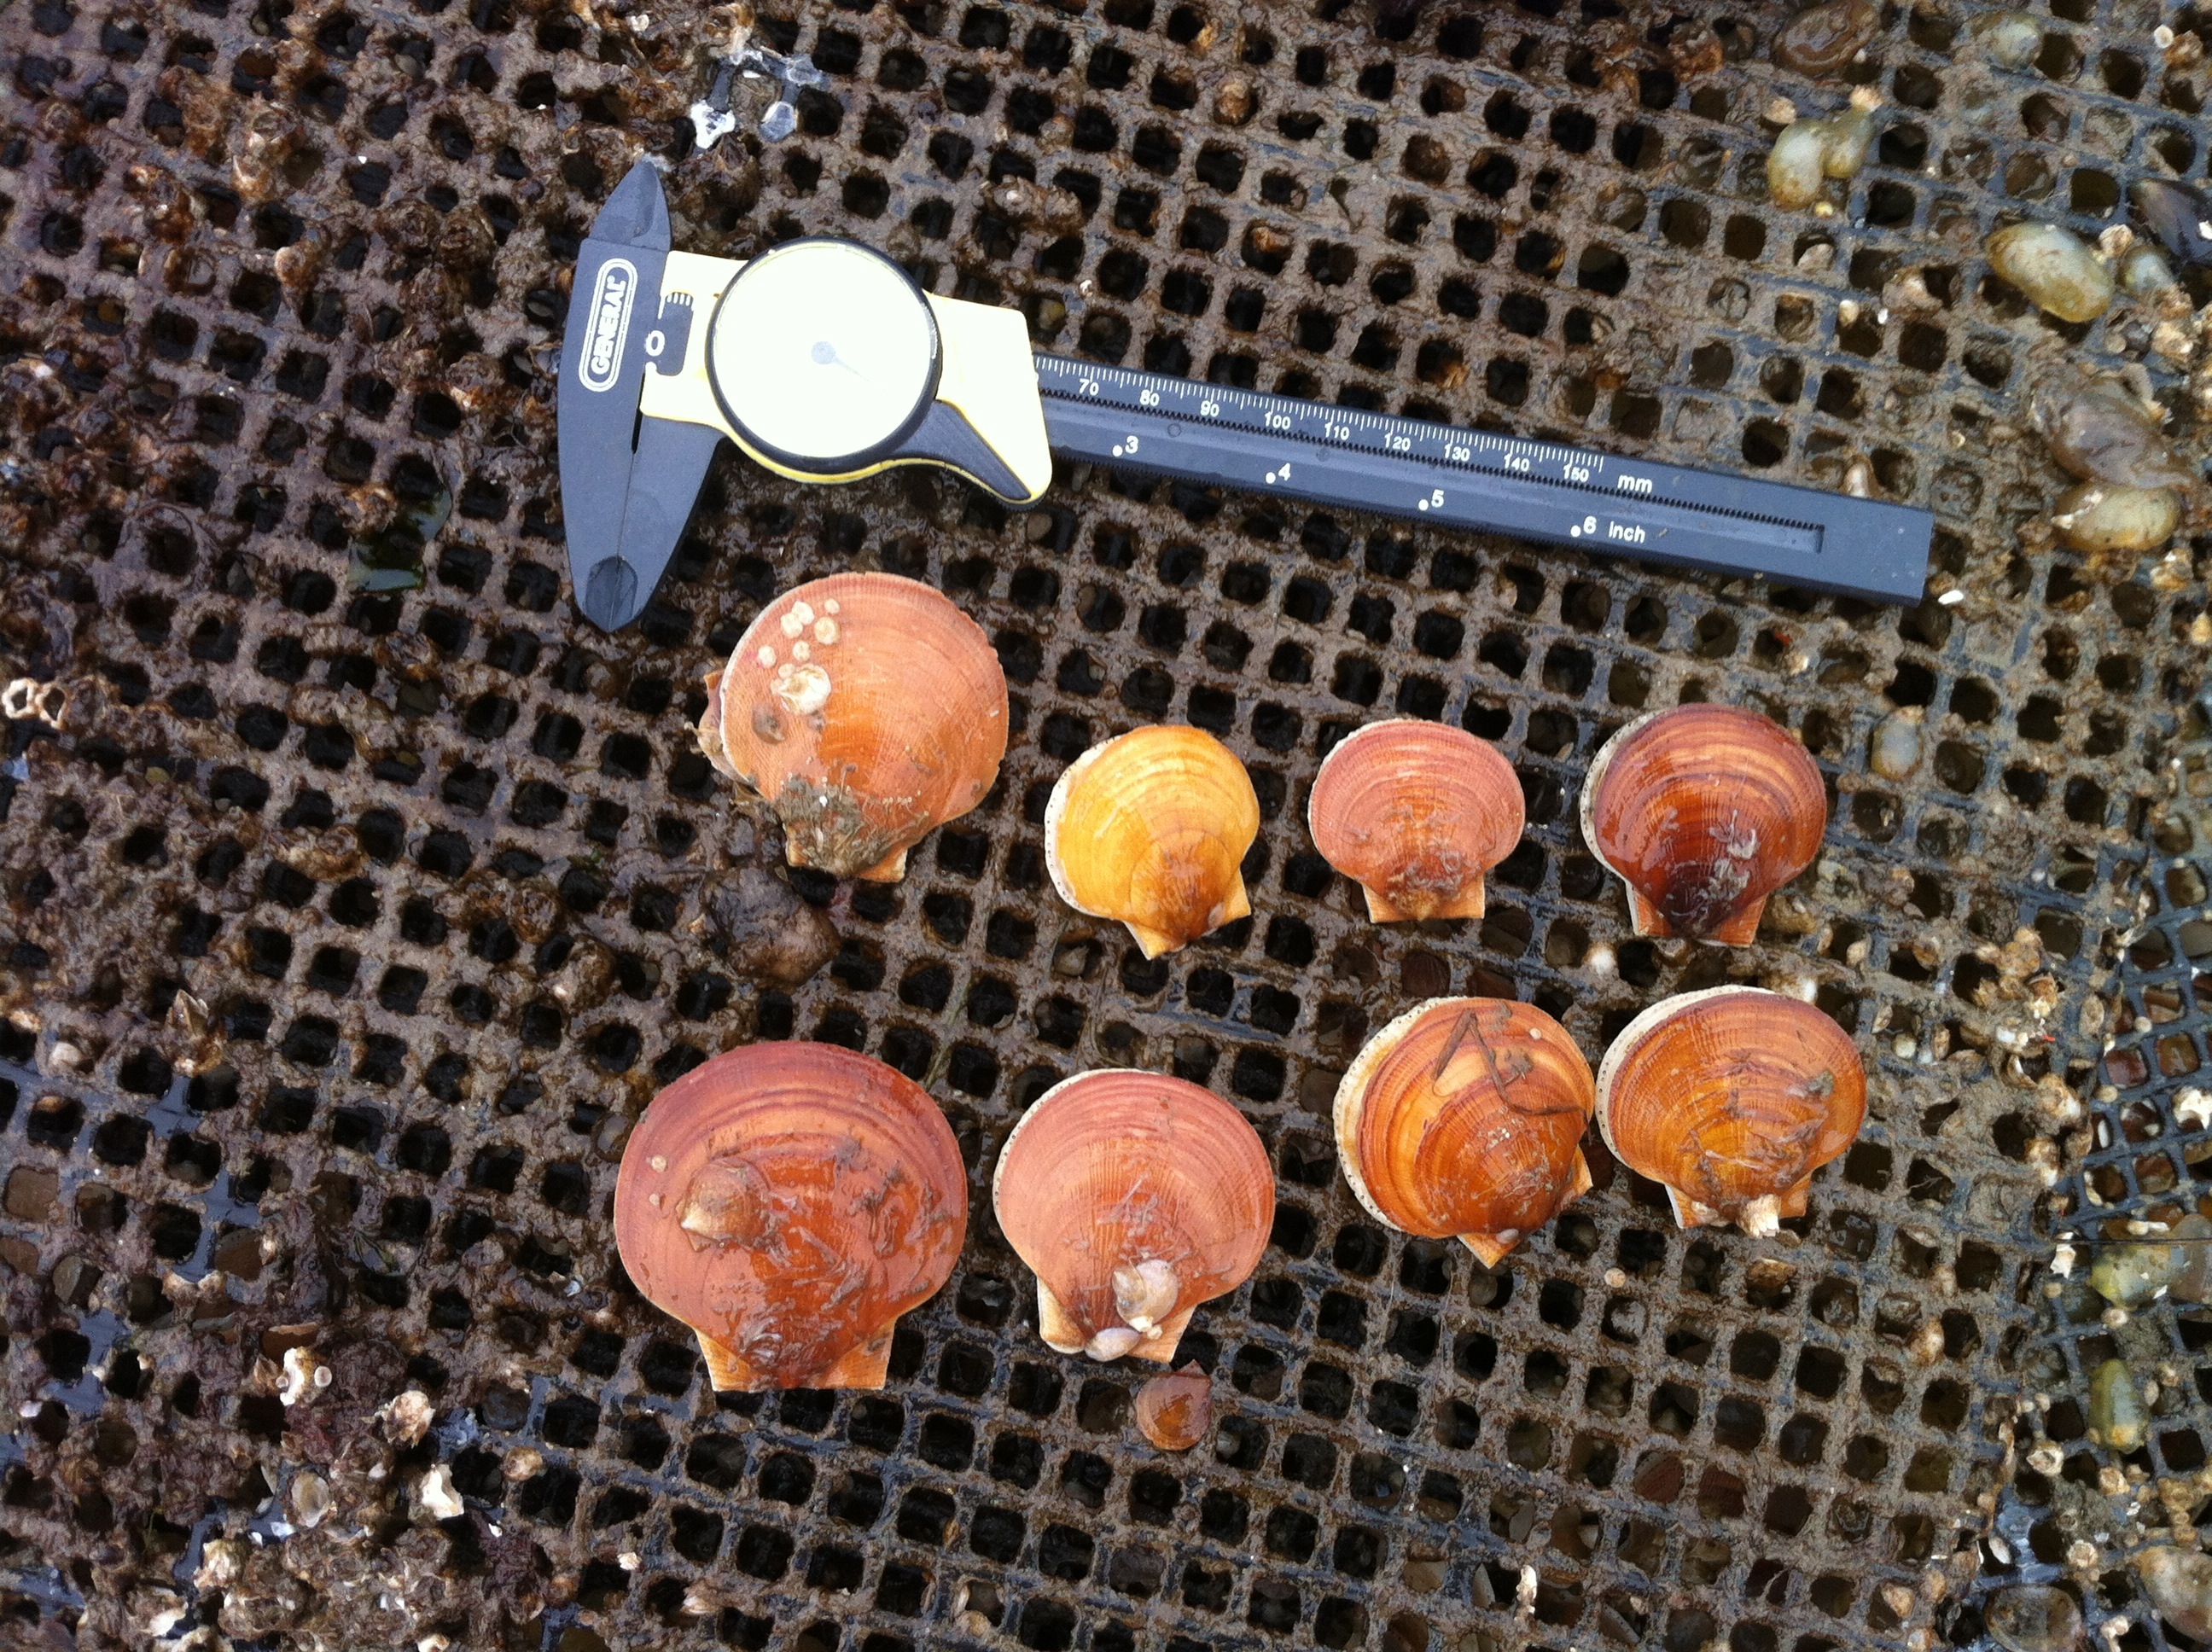 Eight scallops of different sizes with measuring tool